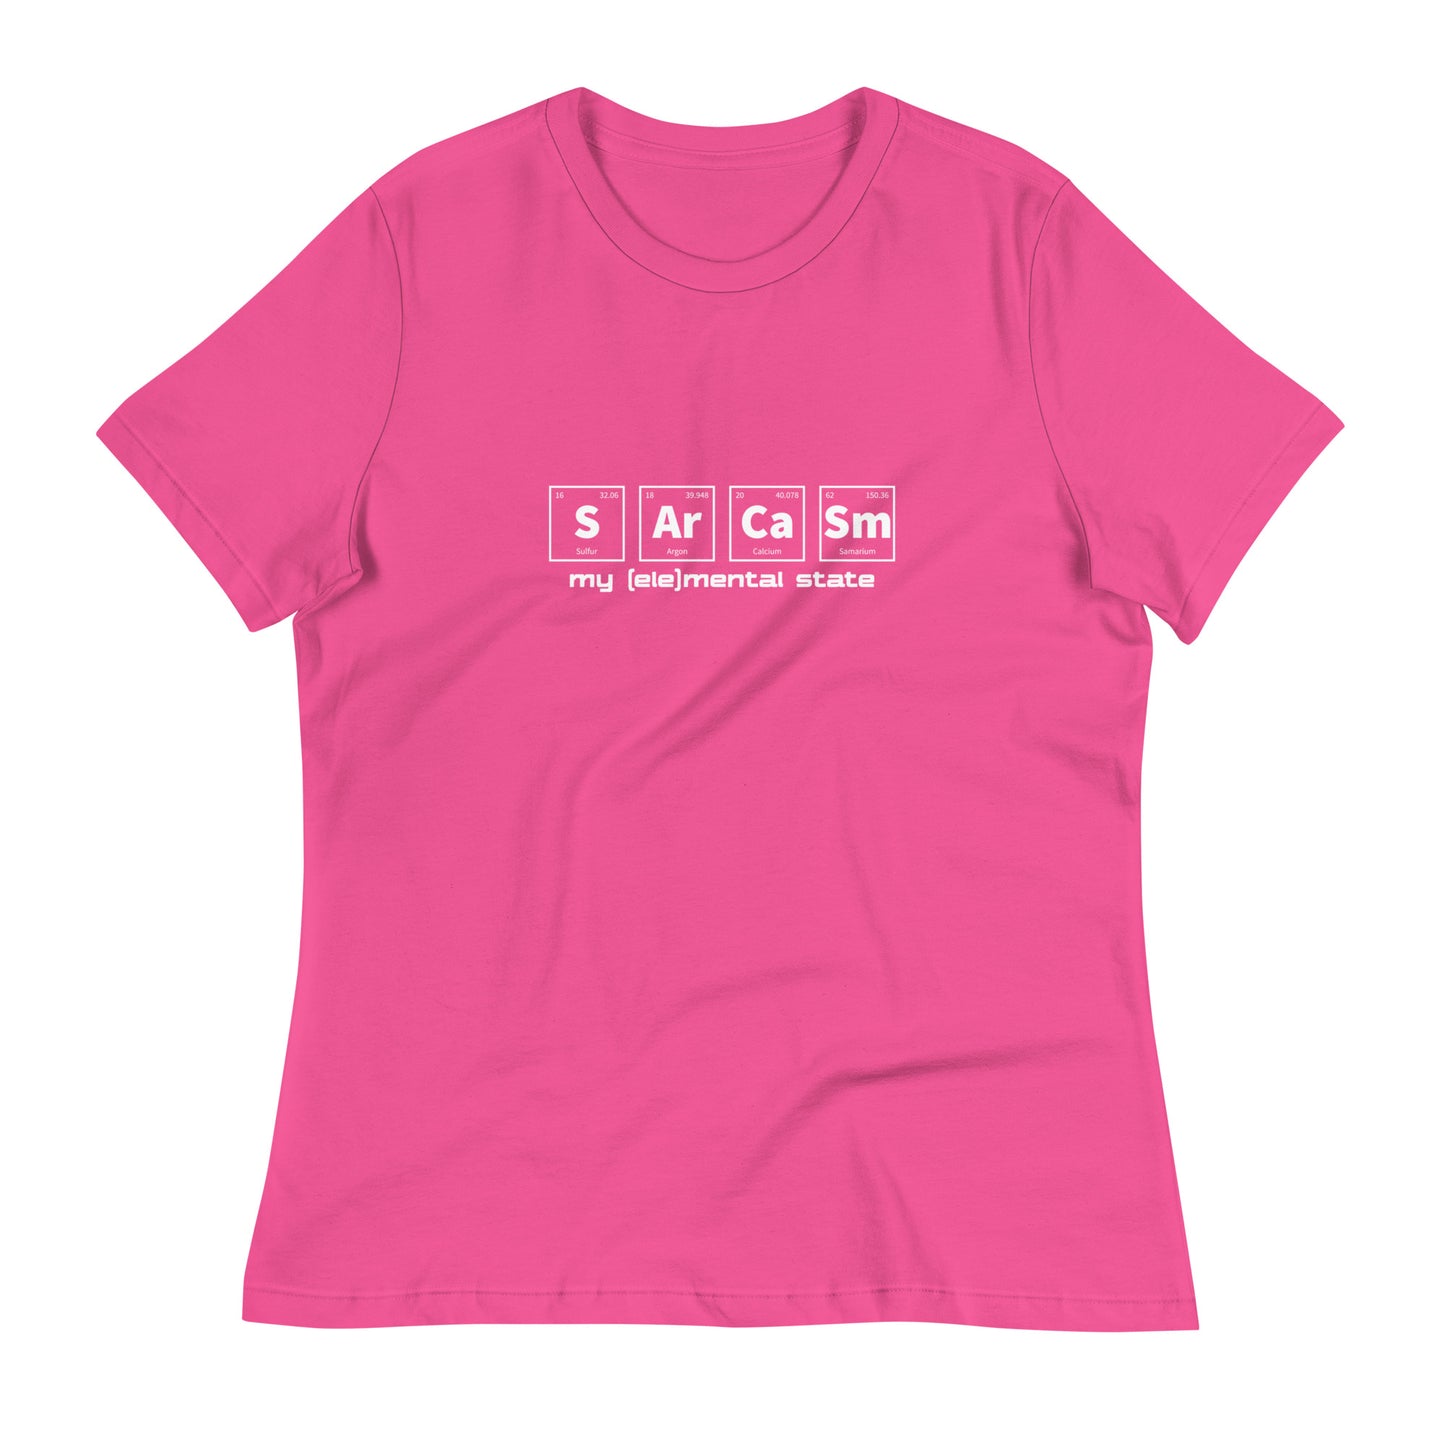 Berry (hot pink) women's relaxed fit t-shirt with graphic of periodic table of elements symbols for Sulfur (S), Argon (Ar), Calcium (Ca), and Samarium (Sm) and text "my (ele)mental state"